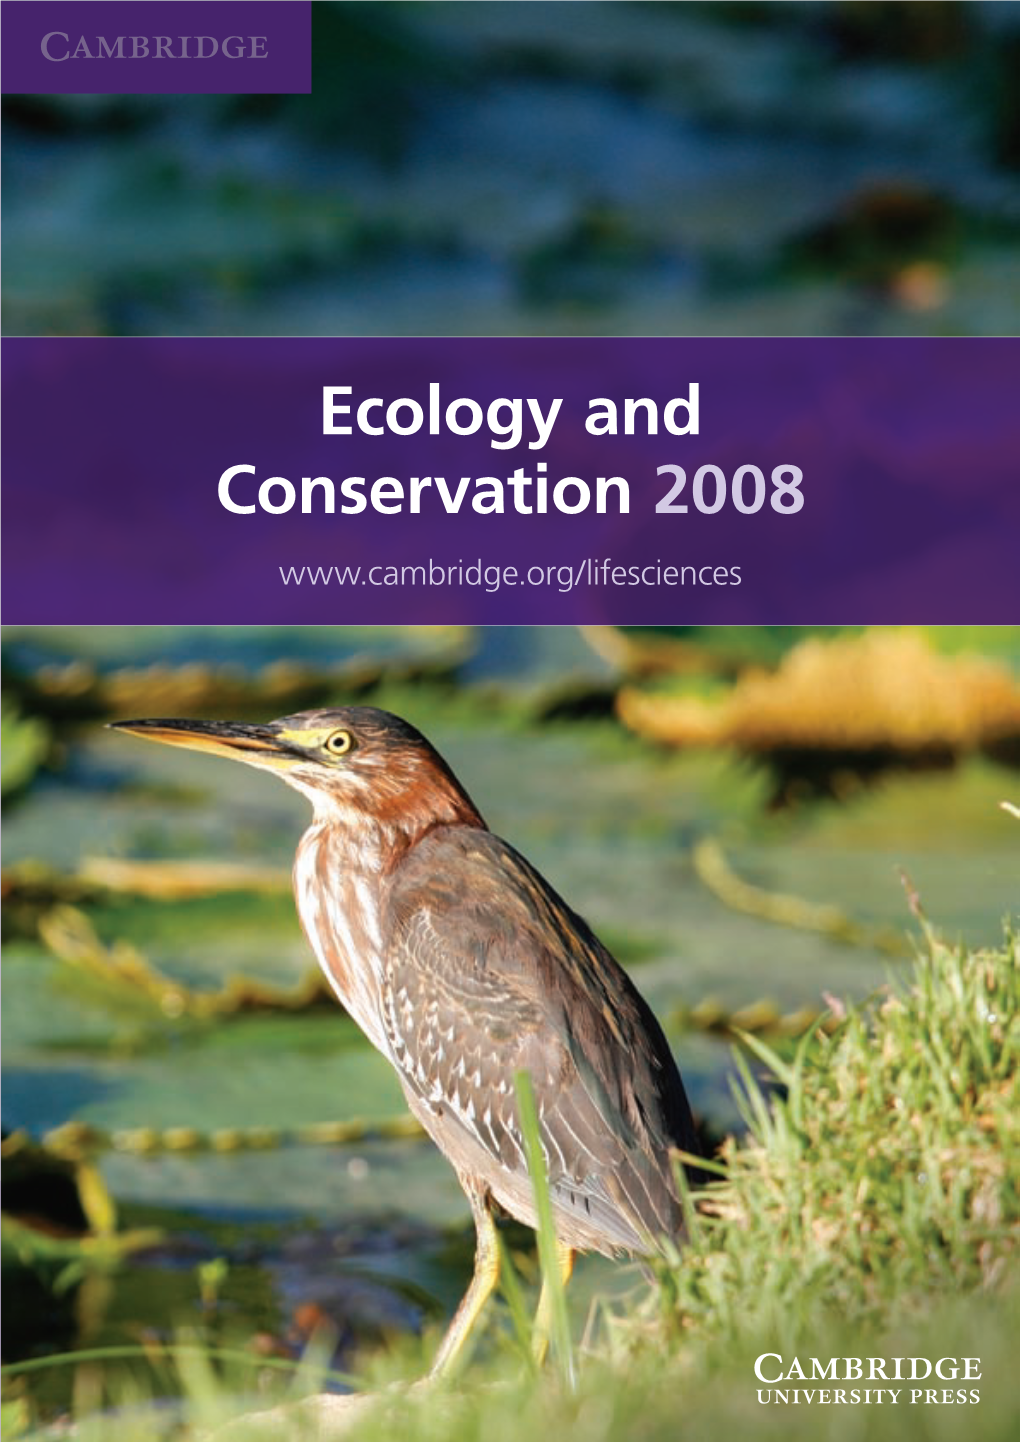 Ecology and Conservation 2008 Order Inspection Copies